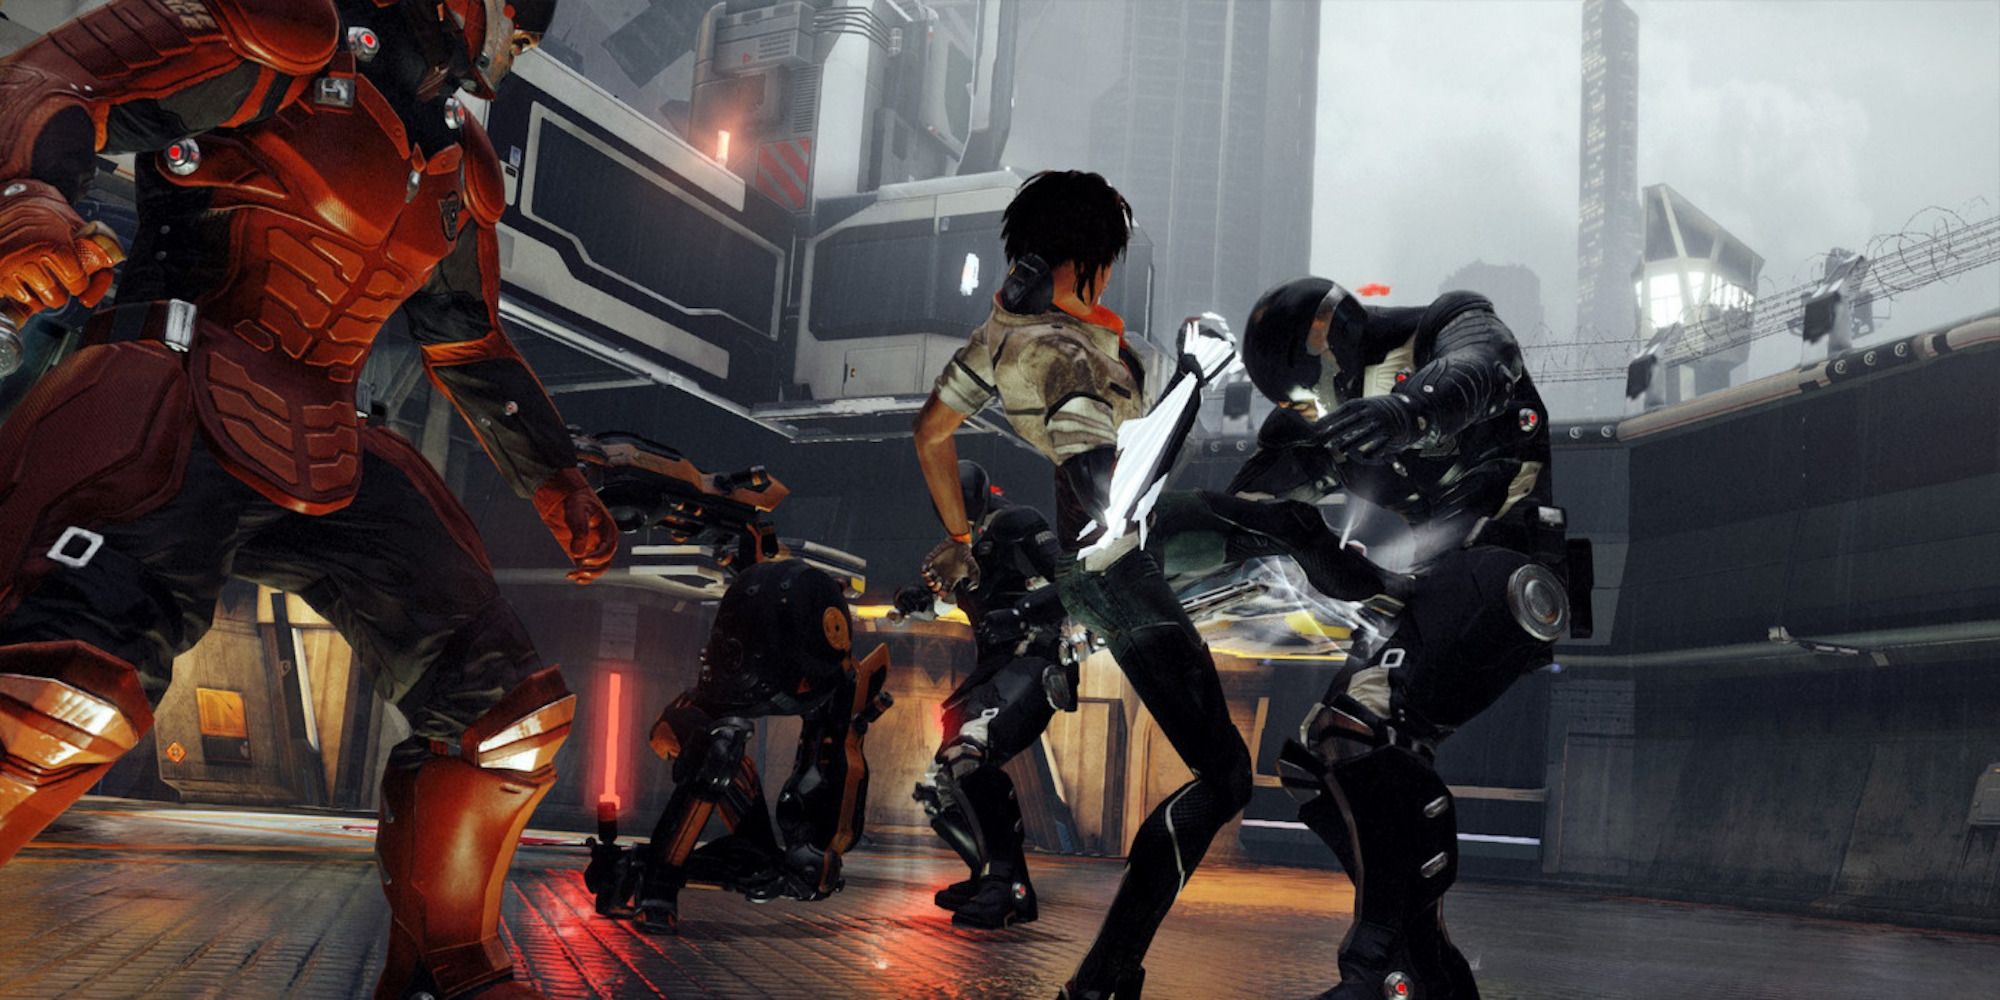 The protagonist fights off enemies in a futuristic building